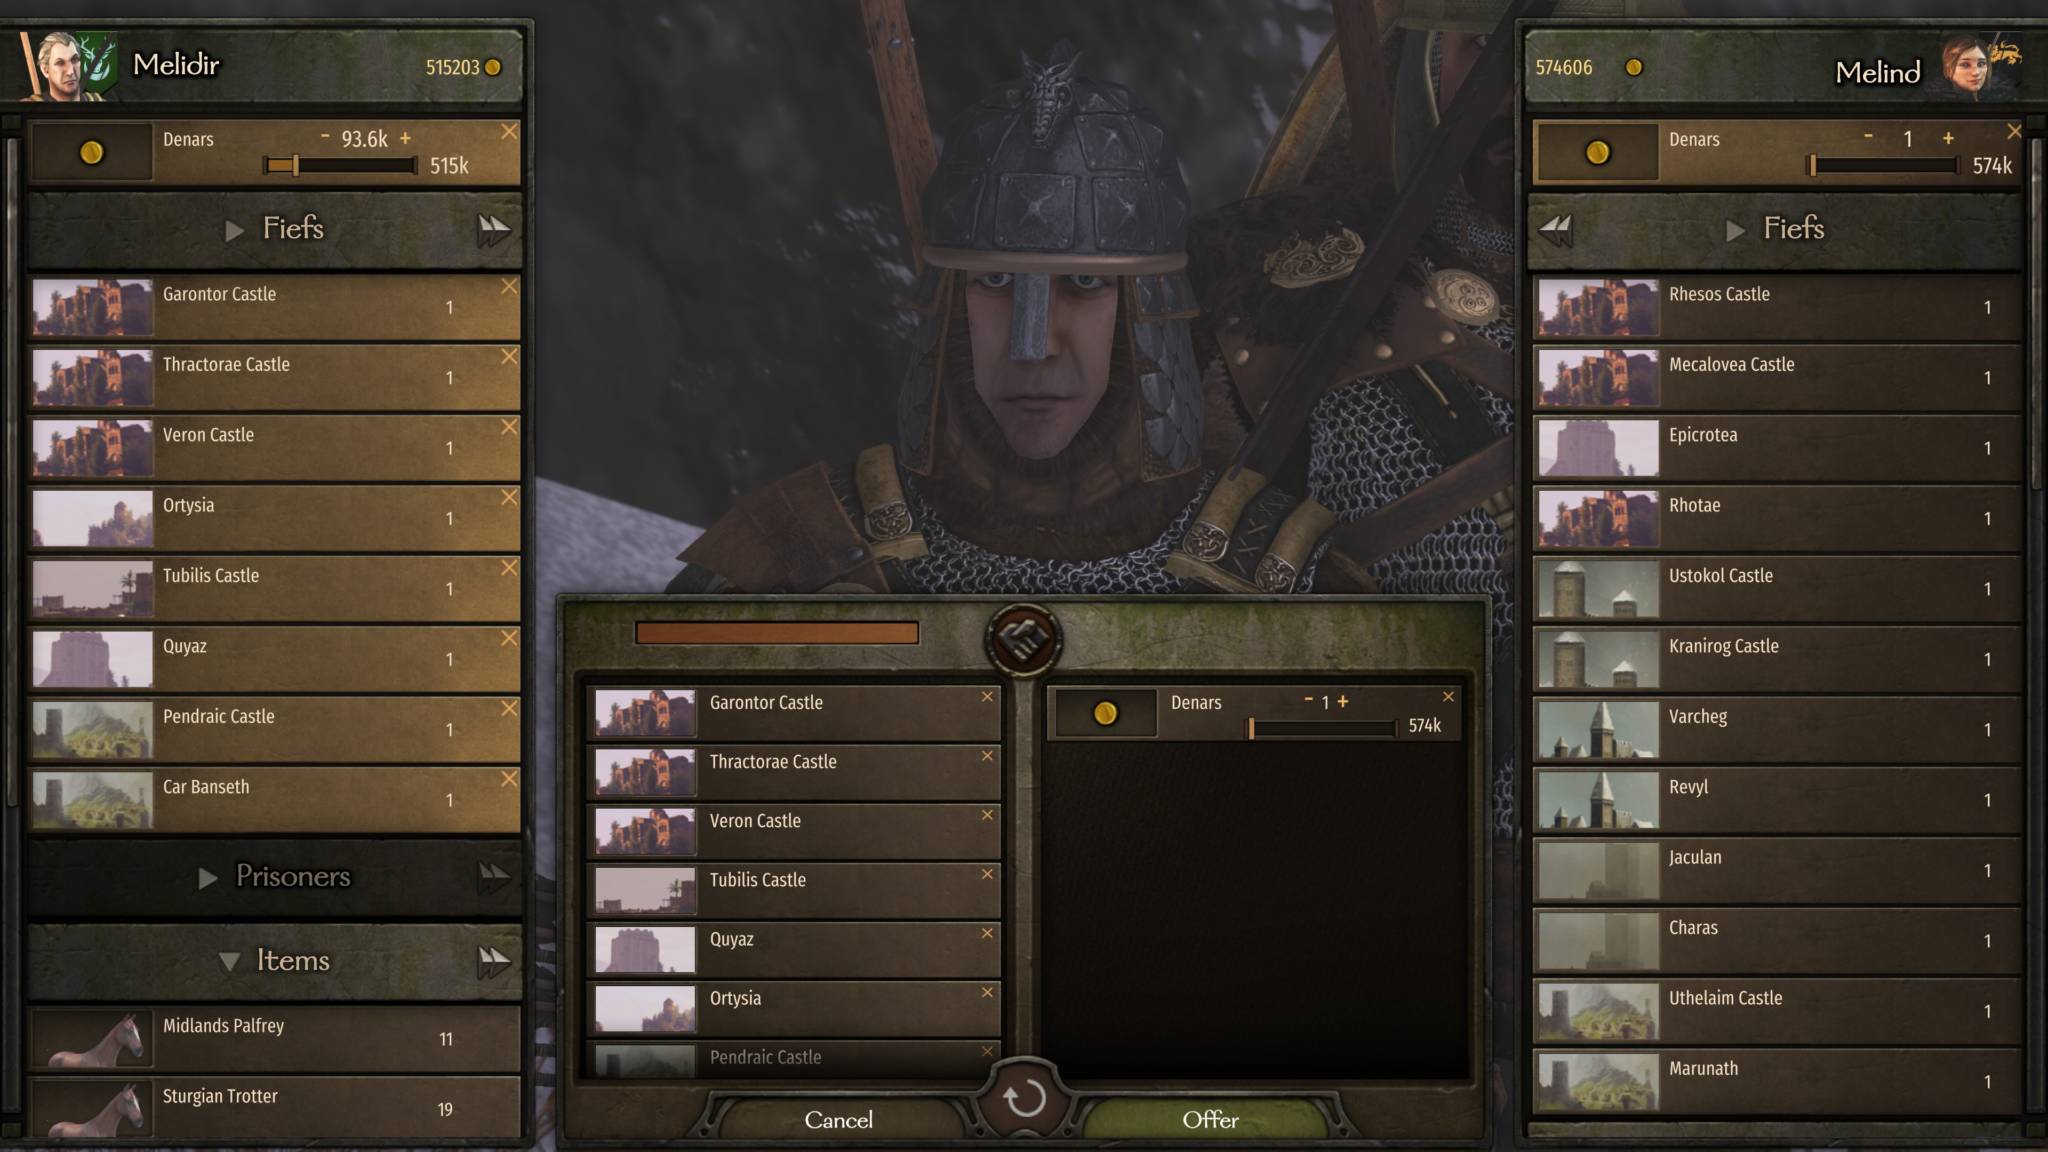 Mount-Blade-II-Bannerlord-Mount-and-Blade-II-Bannerlord-trade-skill-economy-resources-trading-bartering-trading-settlements-everything-has-a-price-perk.jpg